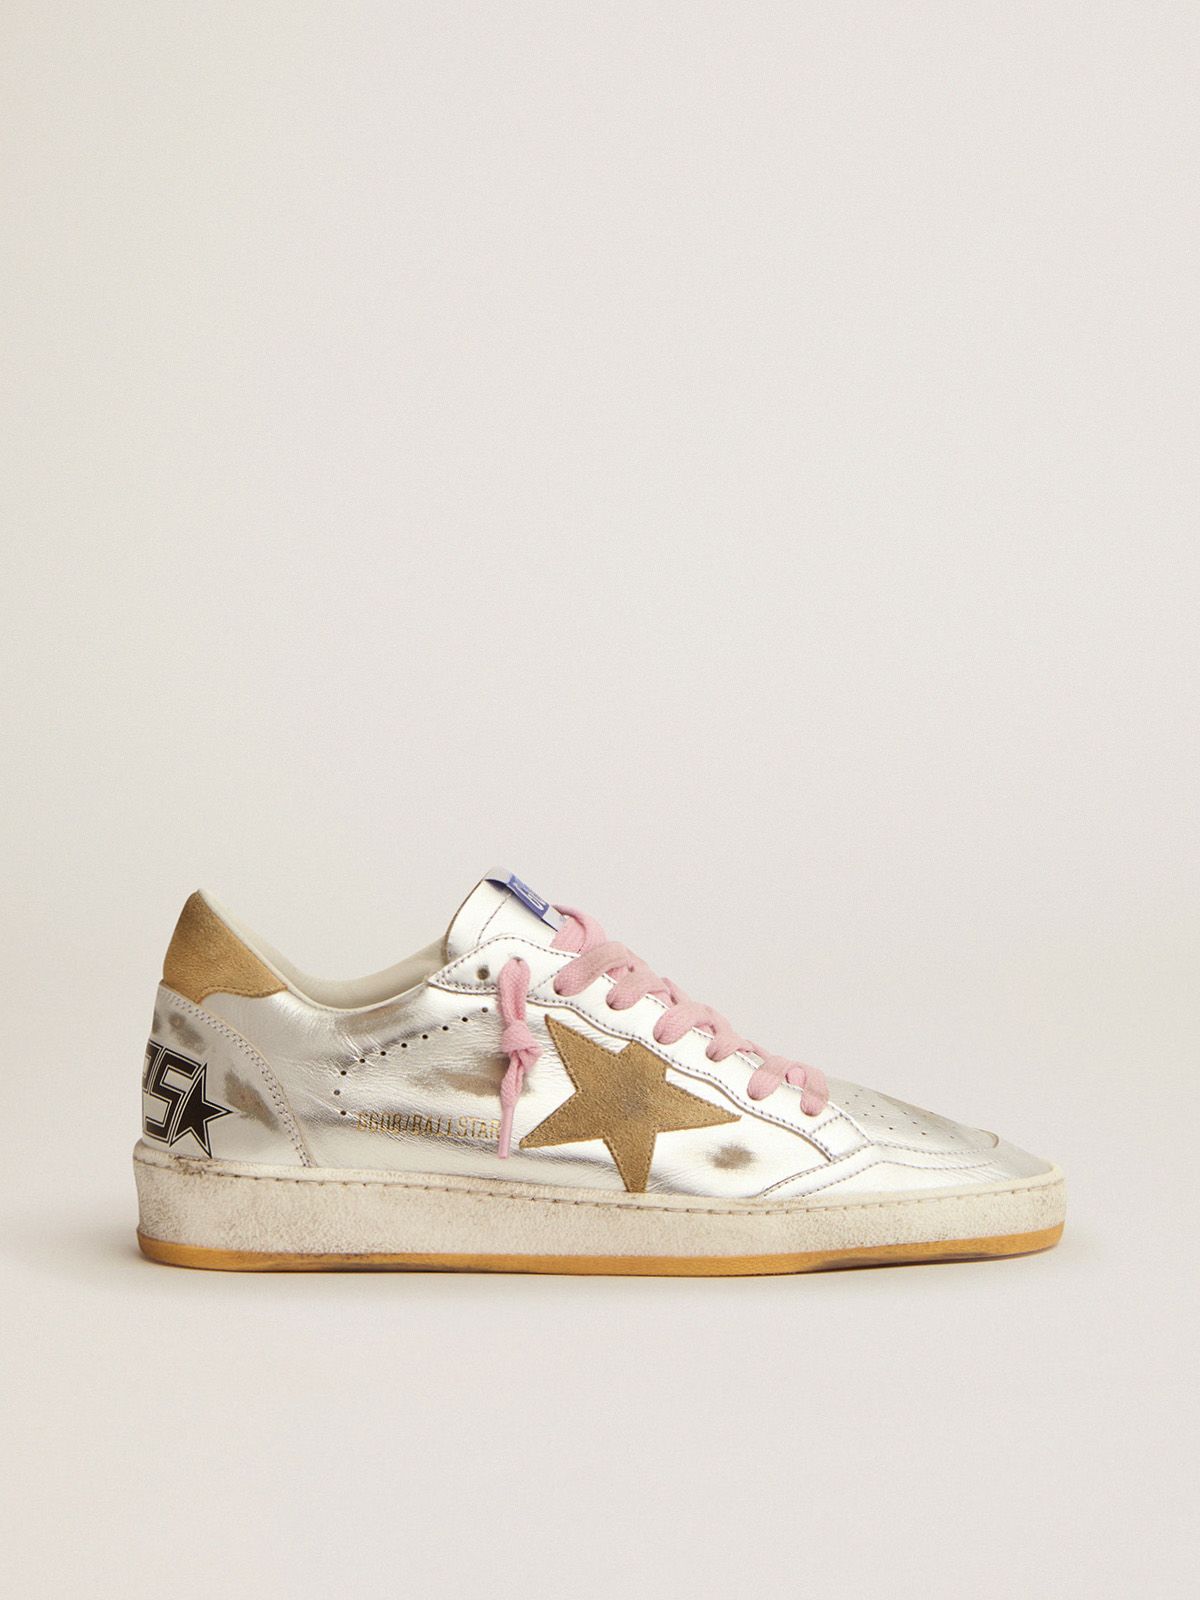 Ball Star LTD sneakers in silver laminated leather with sand-colored suede details | 